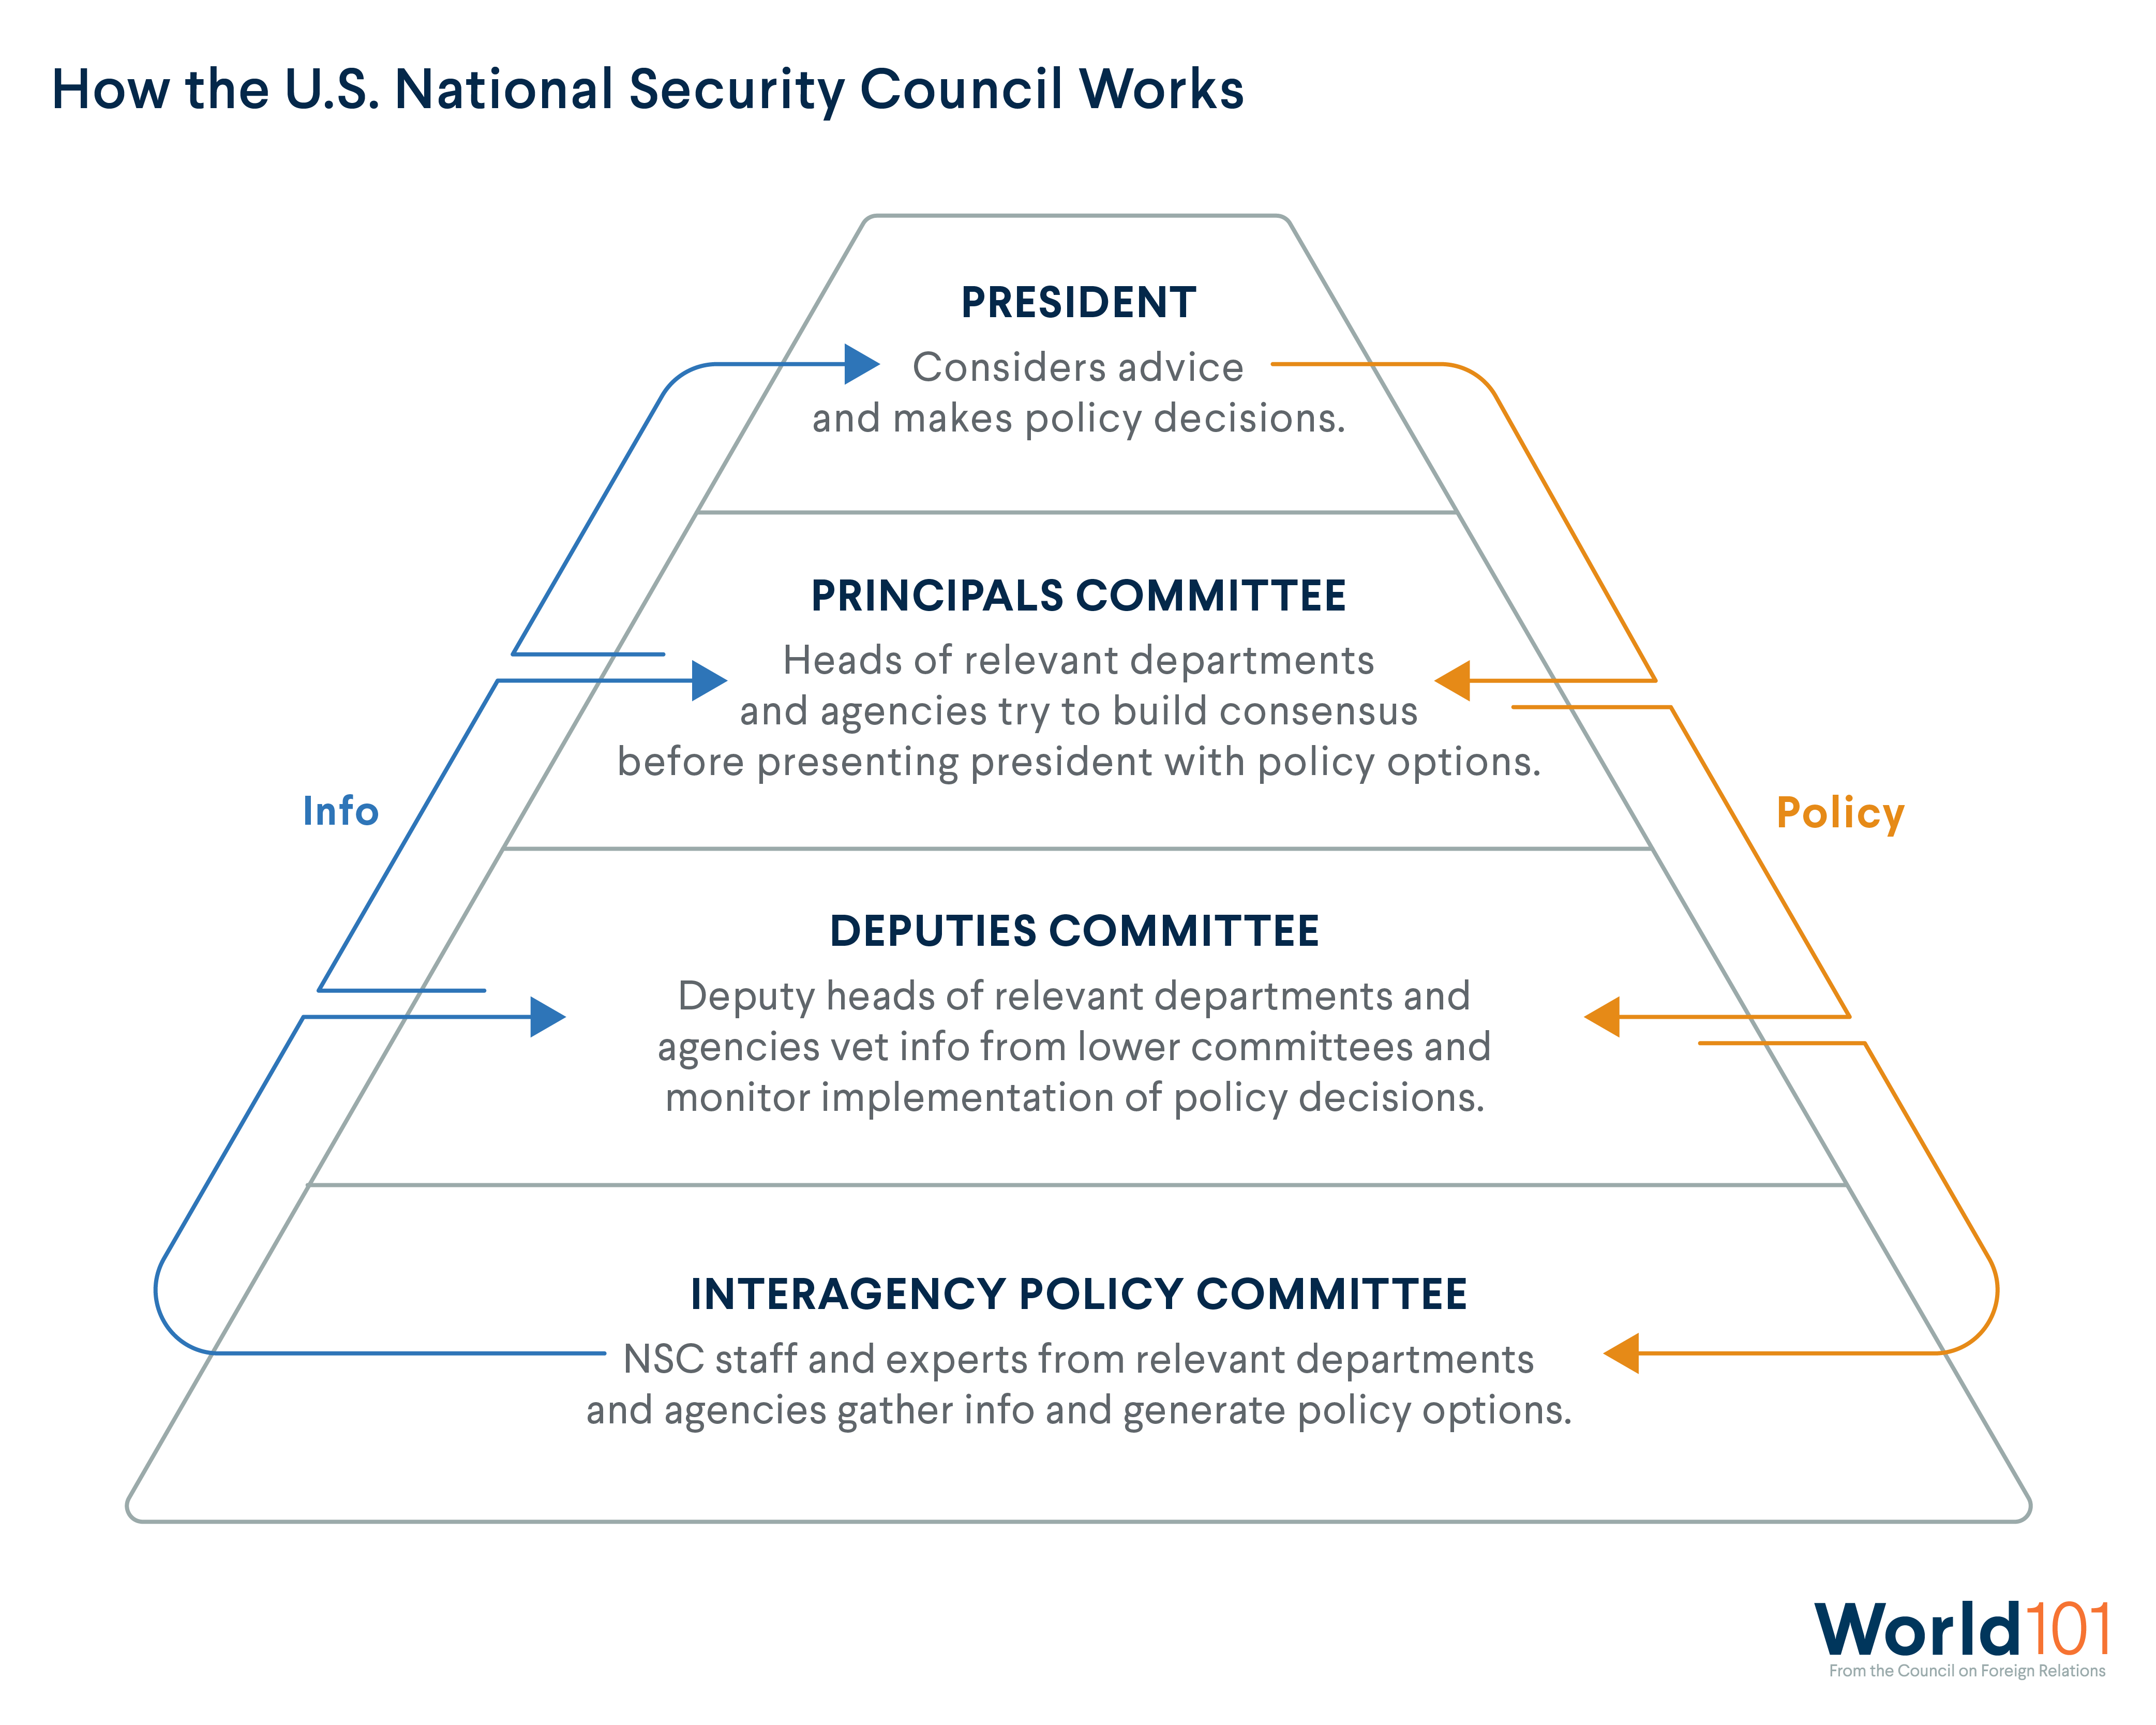 How the U.S. National Security Council Works: President, Principals committee, deputies committee, and interagency policy committee. For more info contact us at world101@cfr.org.